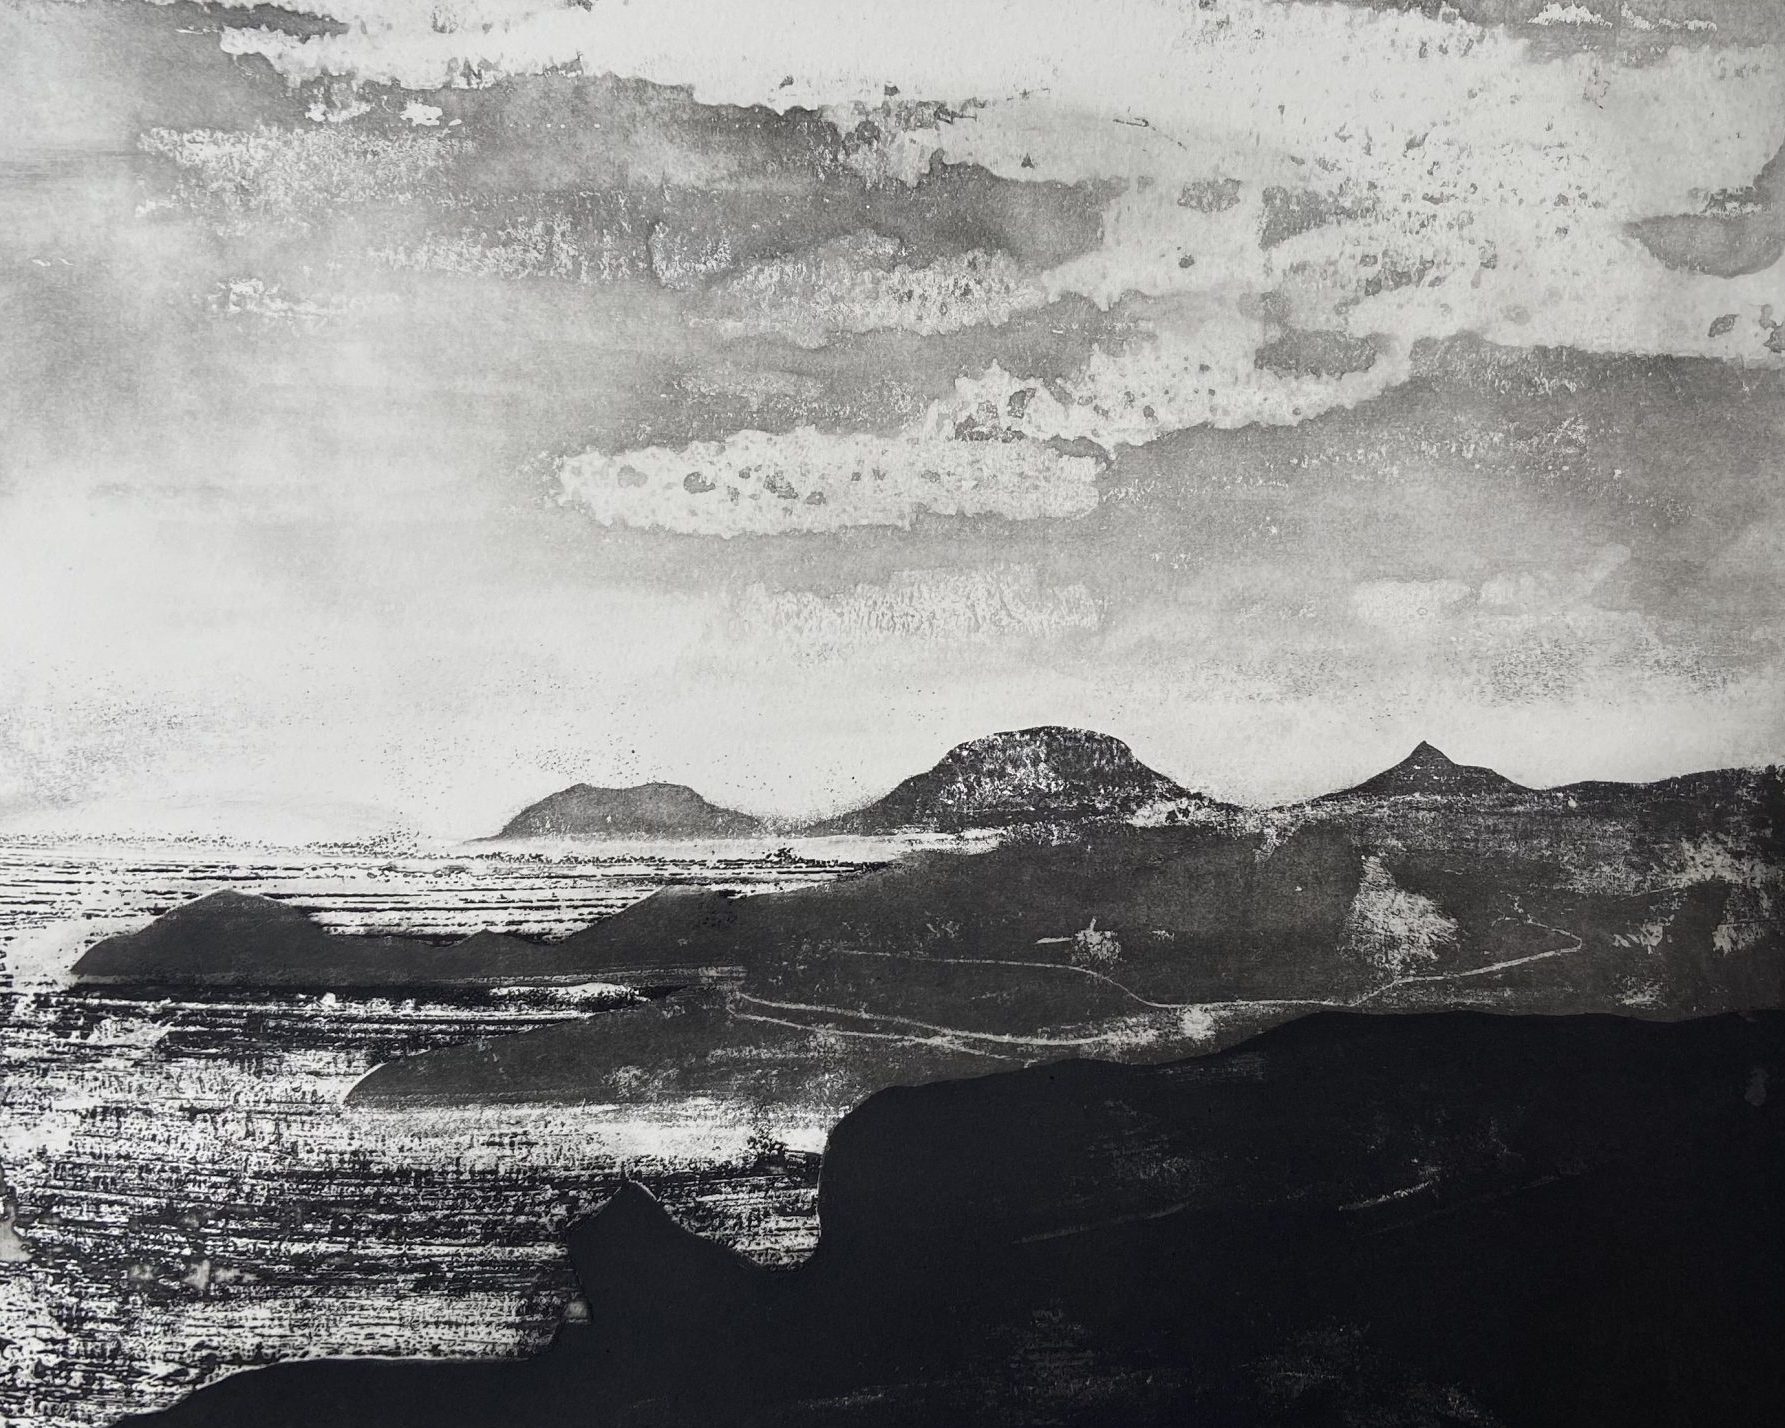 An image of Jason Hicklin's etchning print. There are large rock formations in main focus, clouds and choppy waves of the sea below.